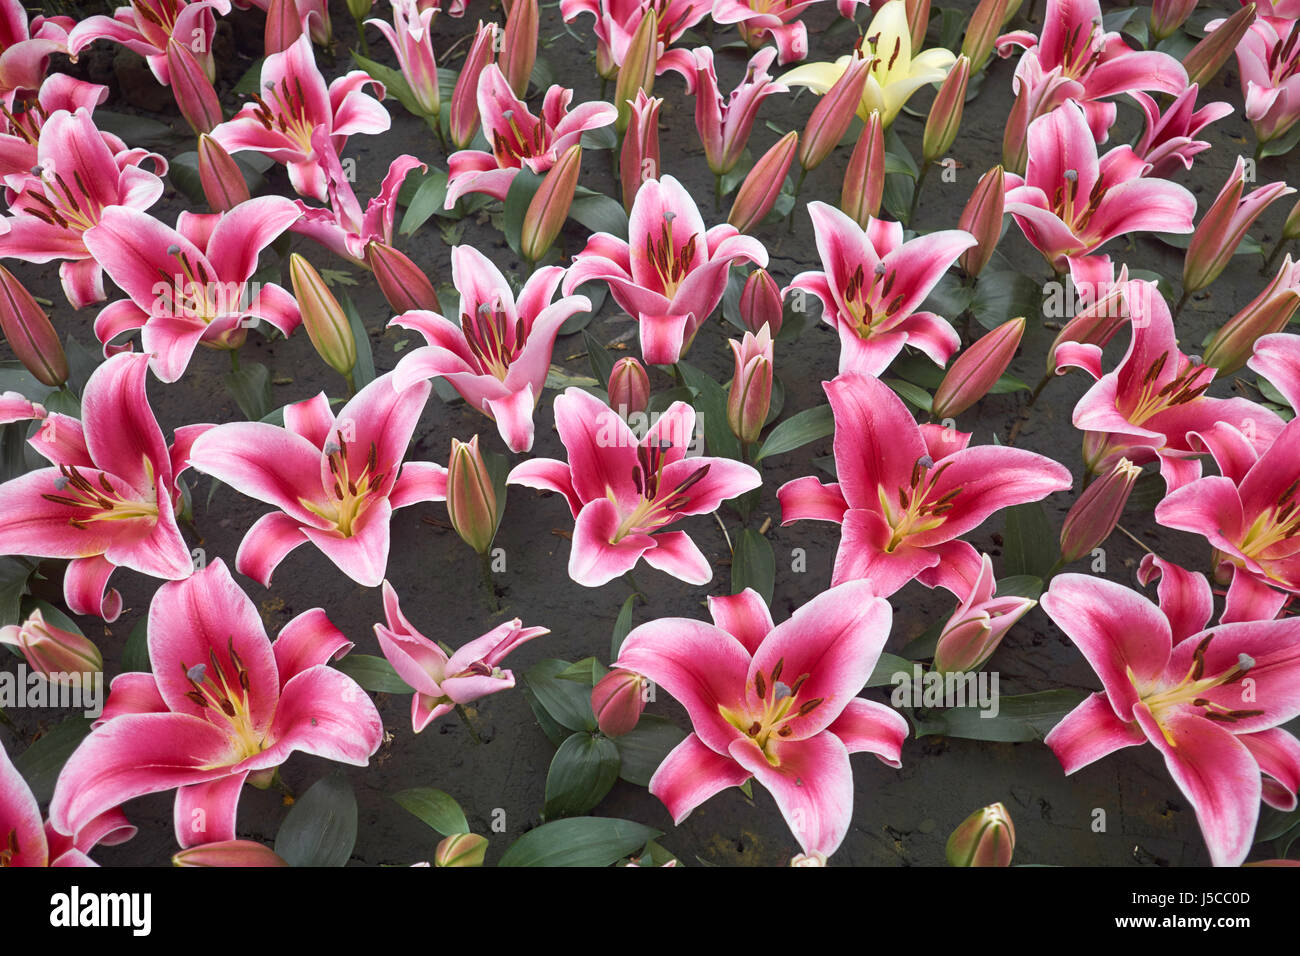 Bouquet with dozens of arranged and open, lush red and pink lilies (Lilium) Stock Photo